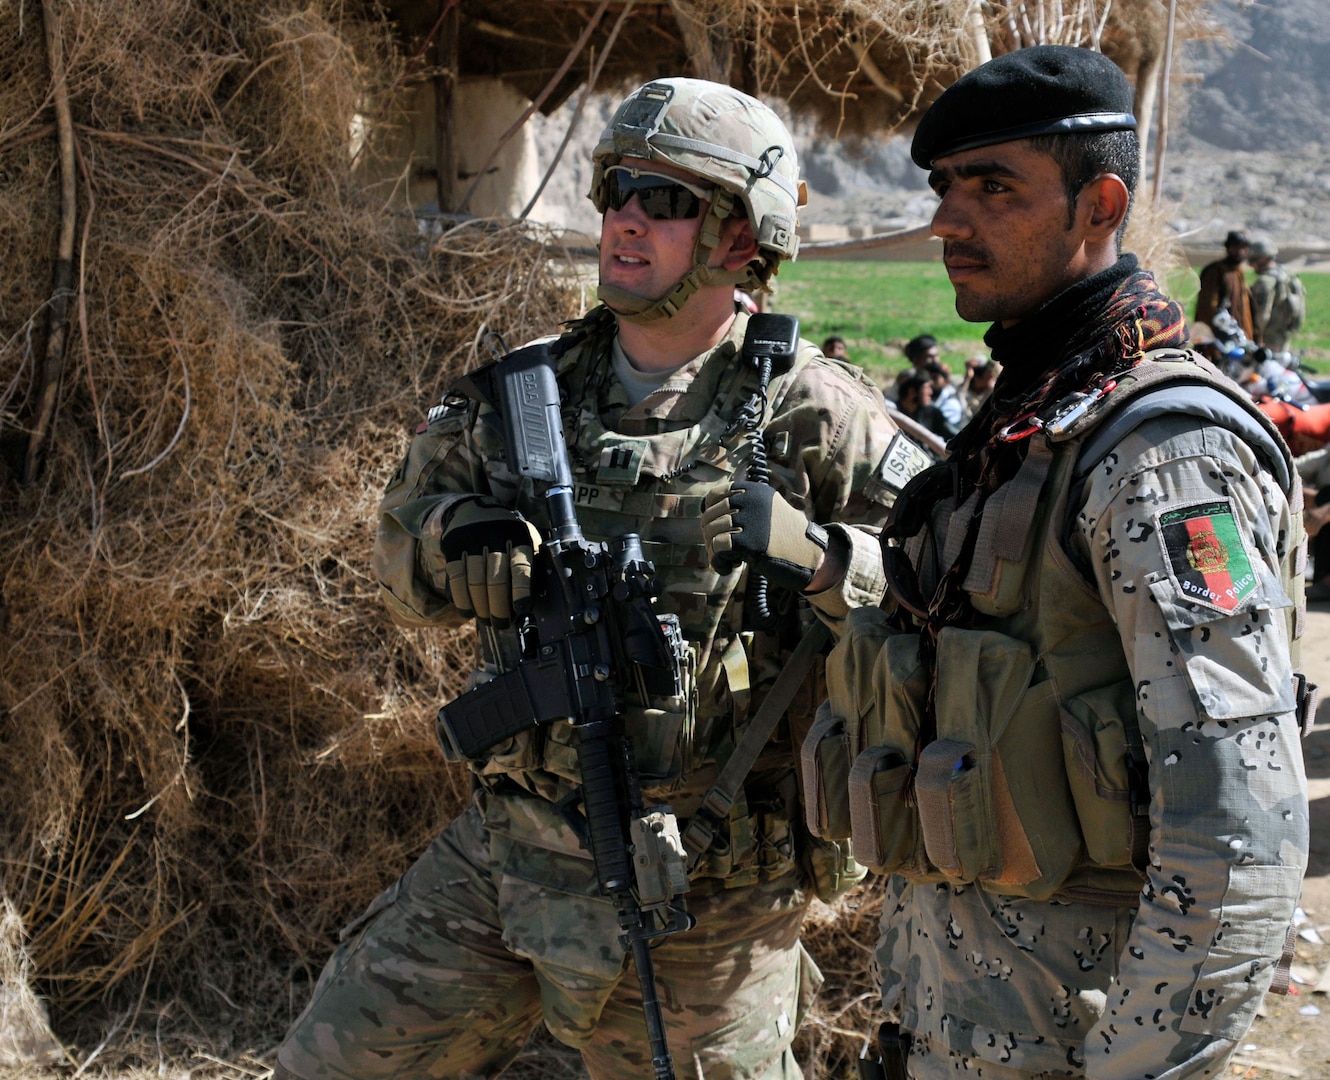 U.S. Army Cpt. Derek C. Knapp, of Austin, Texas, with Security Force Assistance Team 10, Texas Army National Guard, and his Afghan Border Police counterpart discuss security during a shura near the area known as the "Jungle" during Operation Southern Fist III March 5.